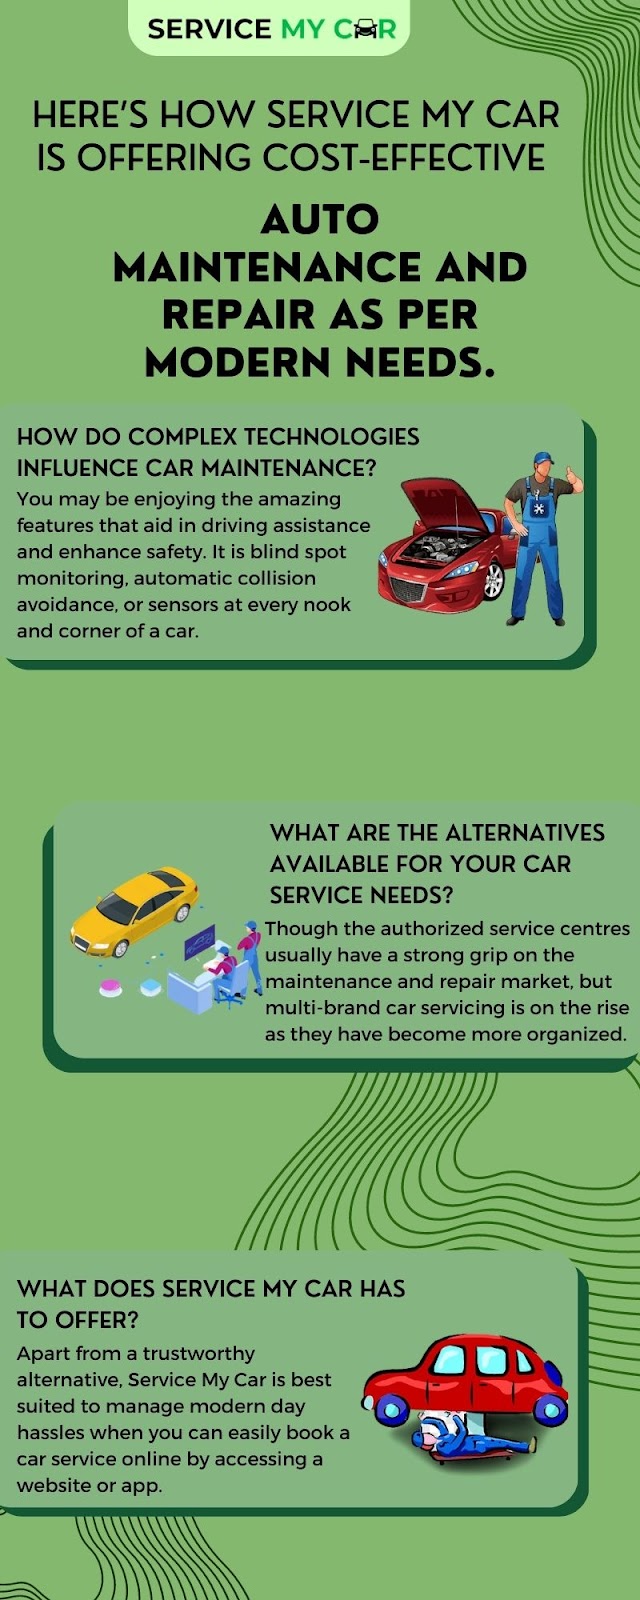 Here’s How Service My Car Is Offering Cost-Effective Auto Maintenance And Repair As Per Modern Needs